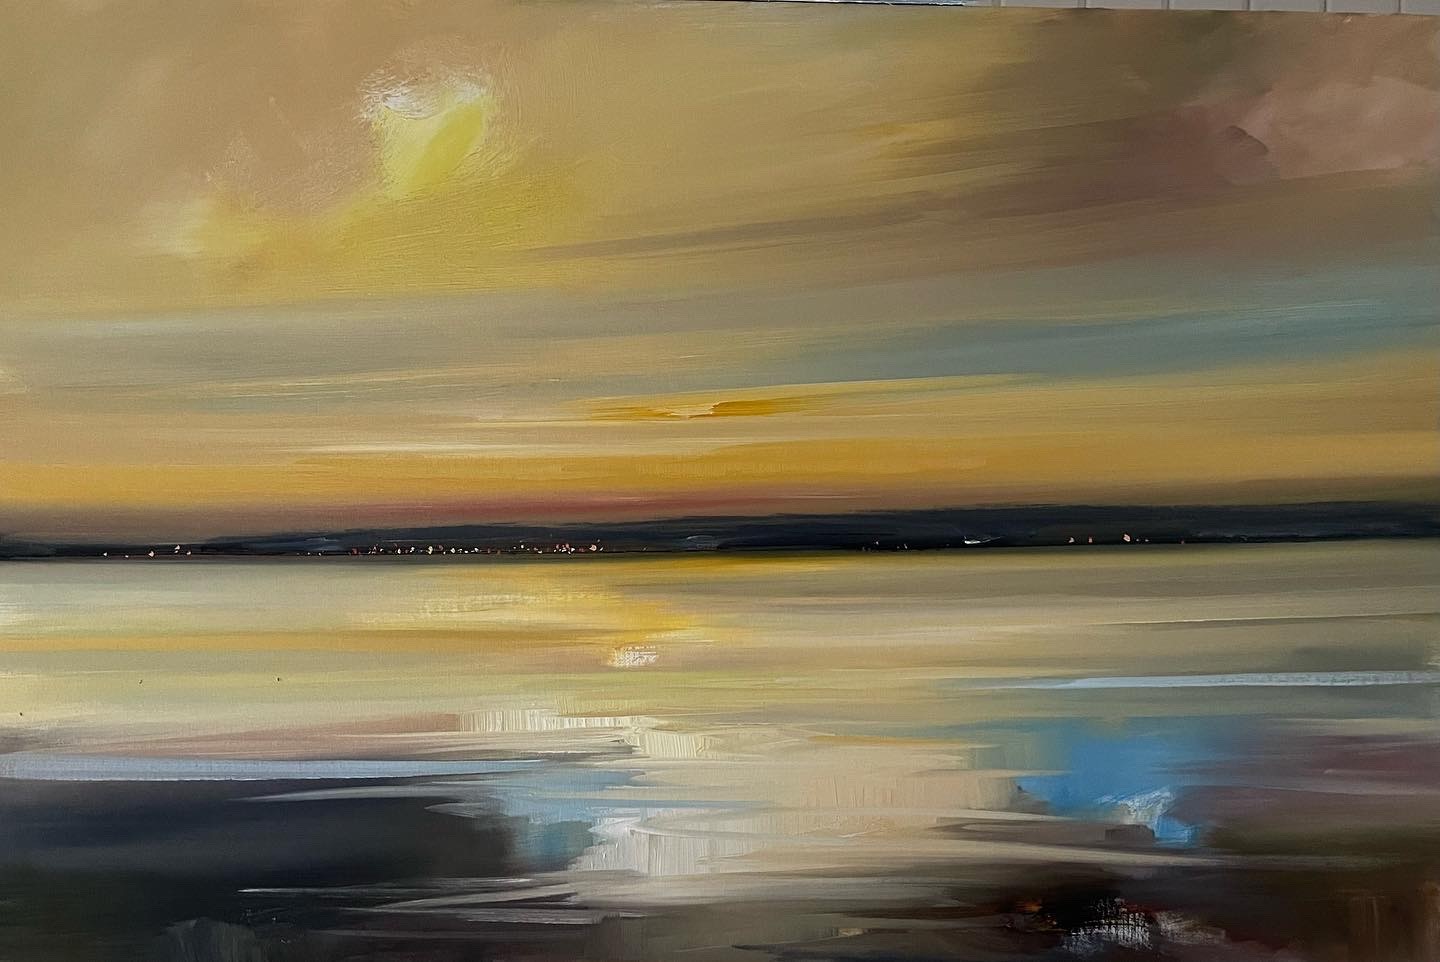 'As the night draws in ' by artist Rosanne Barr